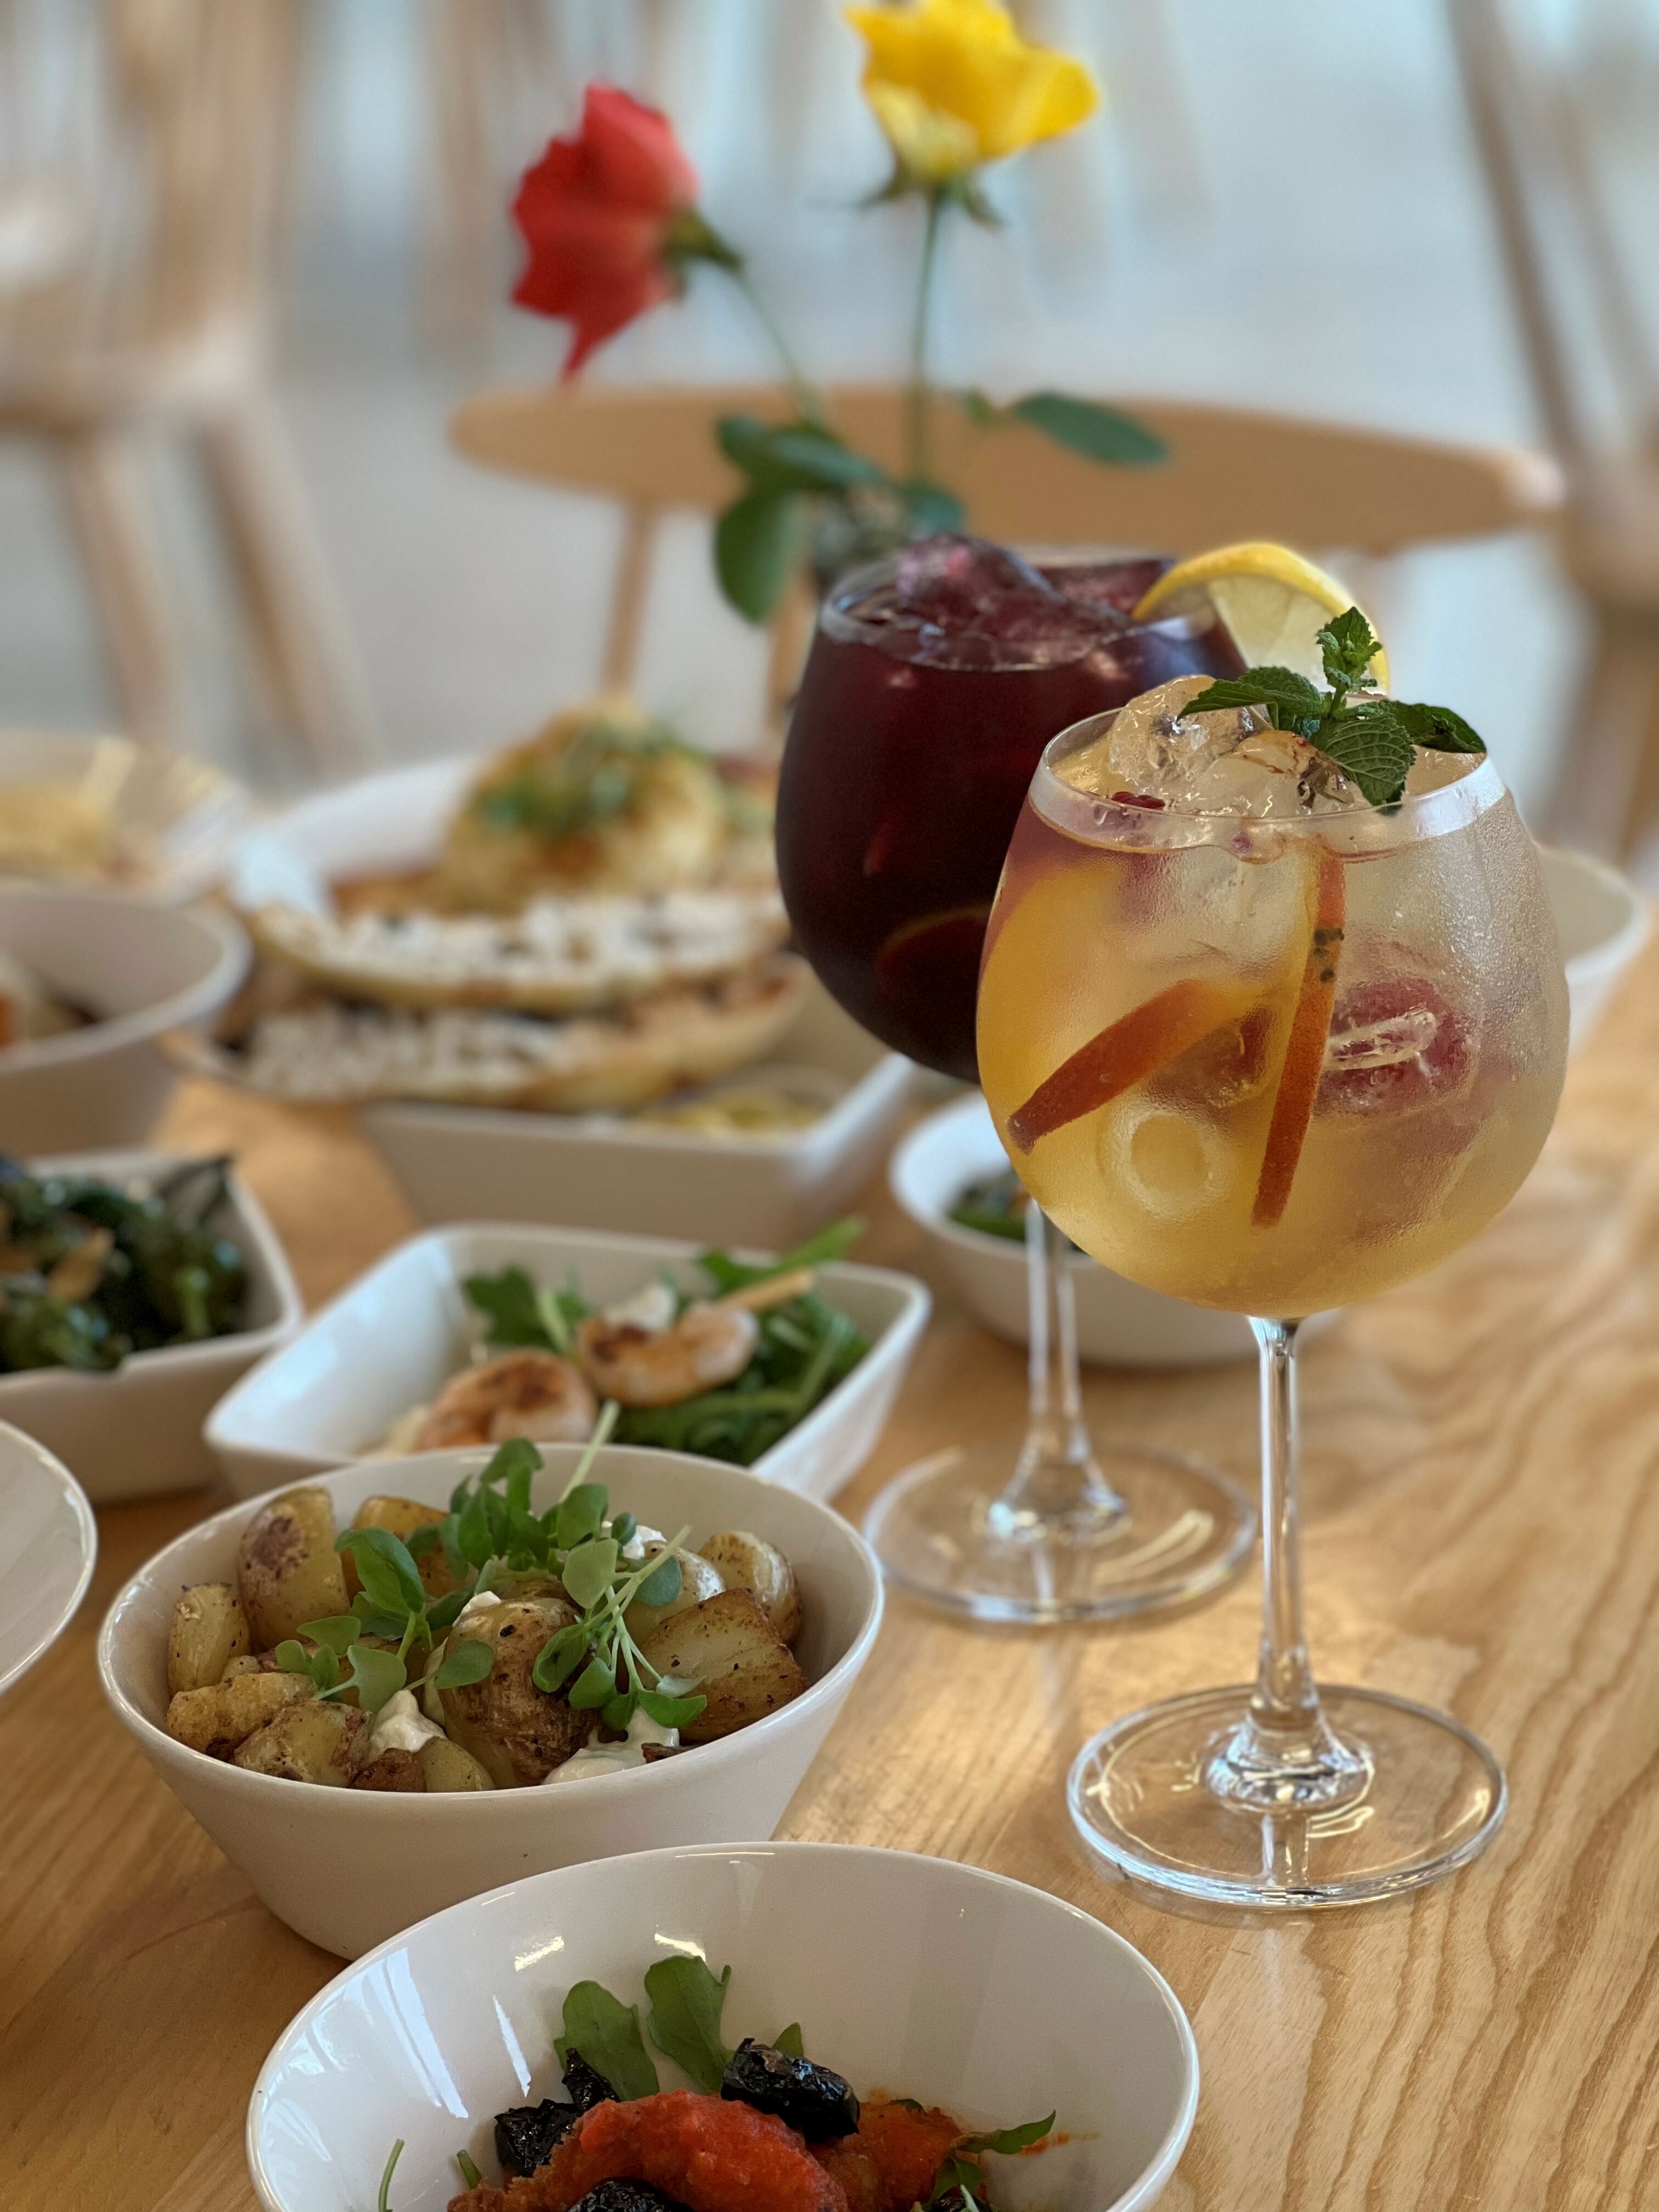 Small plates of tapas and cocktails